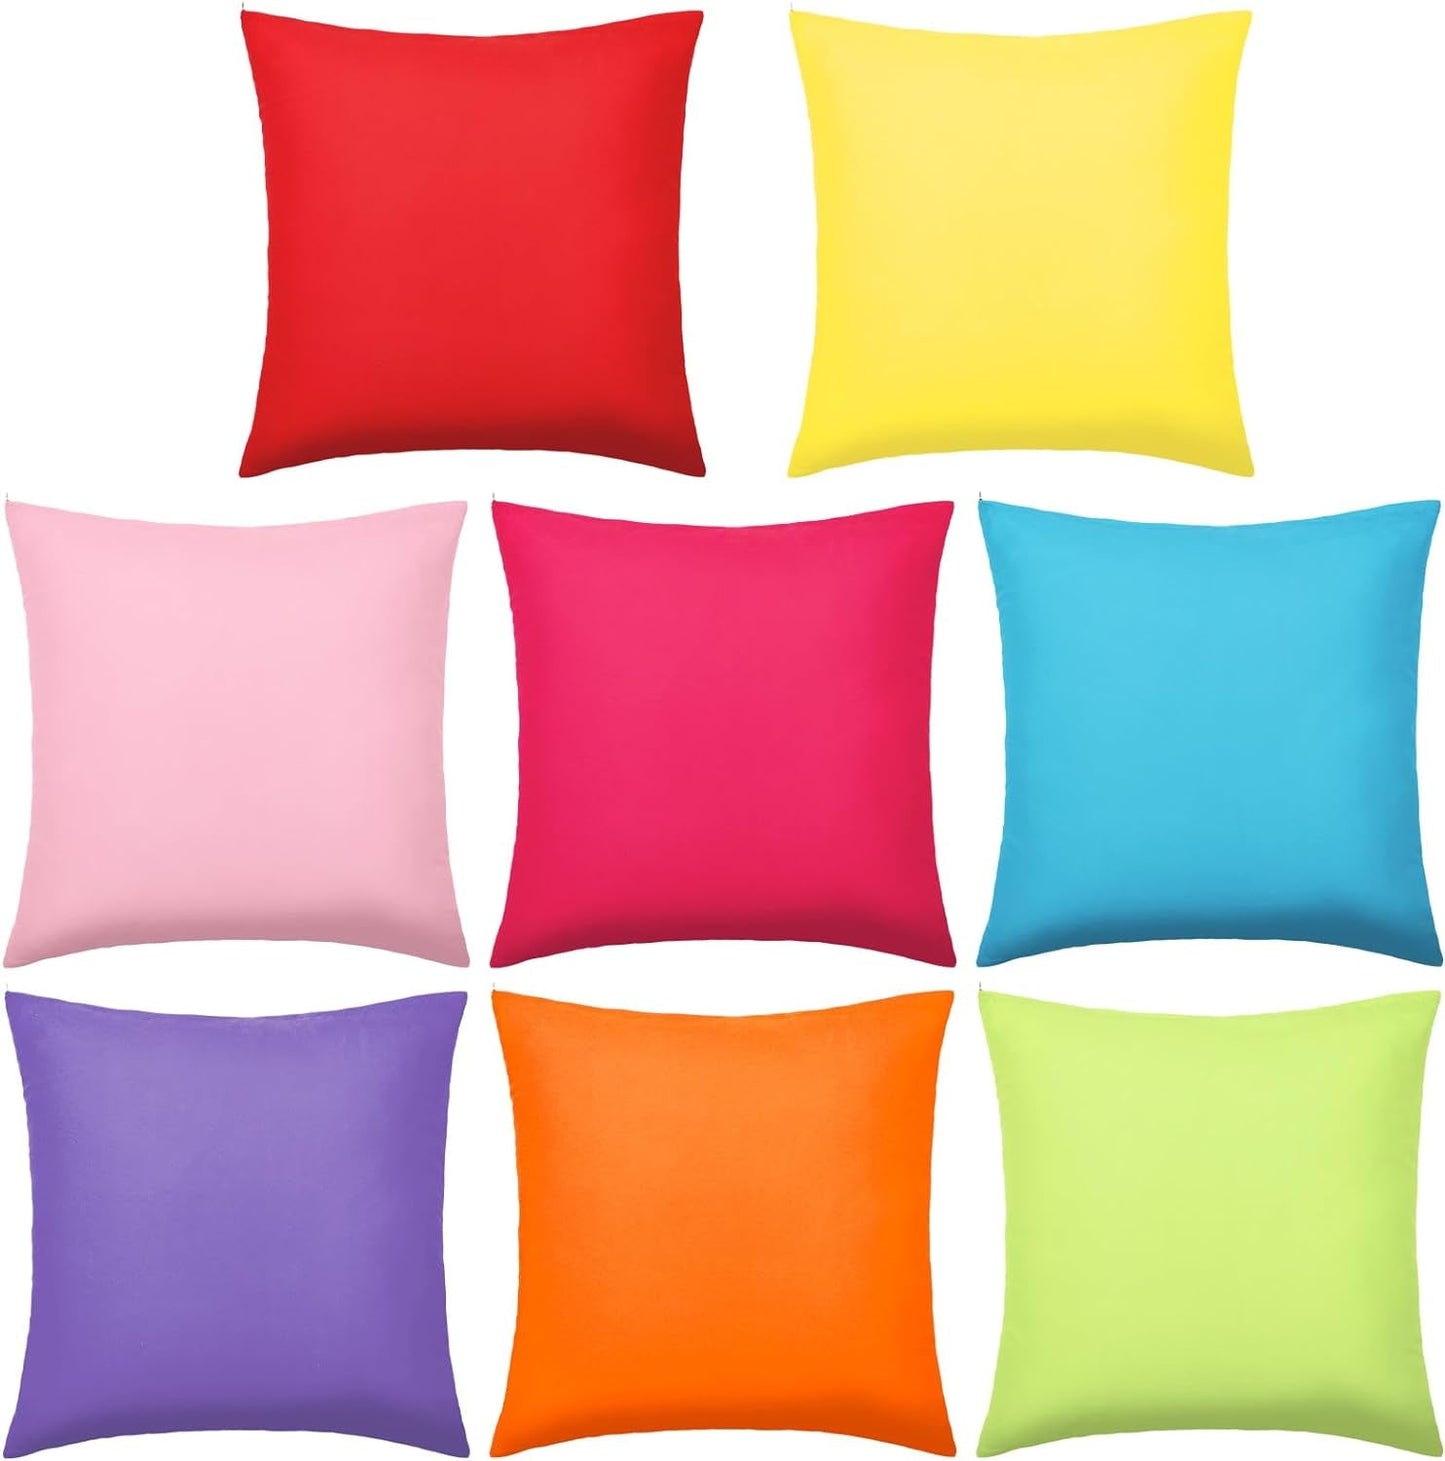 8 Pcs Decorative Throw Pillow Covers Mixed Color Throw Pillow Covers Solid Color Square Pillow Cases for Classroom Couch Bedroom Patio Garden (Covers Only)(Fresh Colors, 18 X 18 Inch)